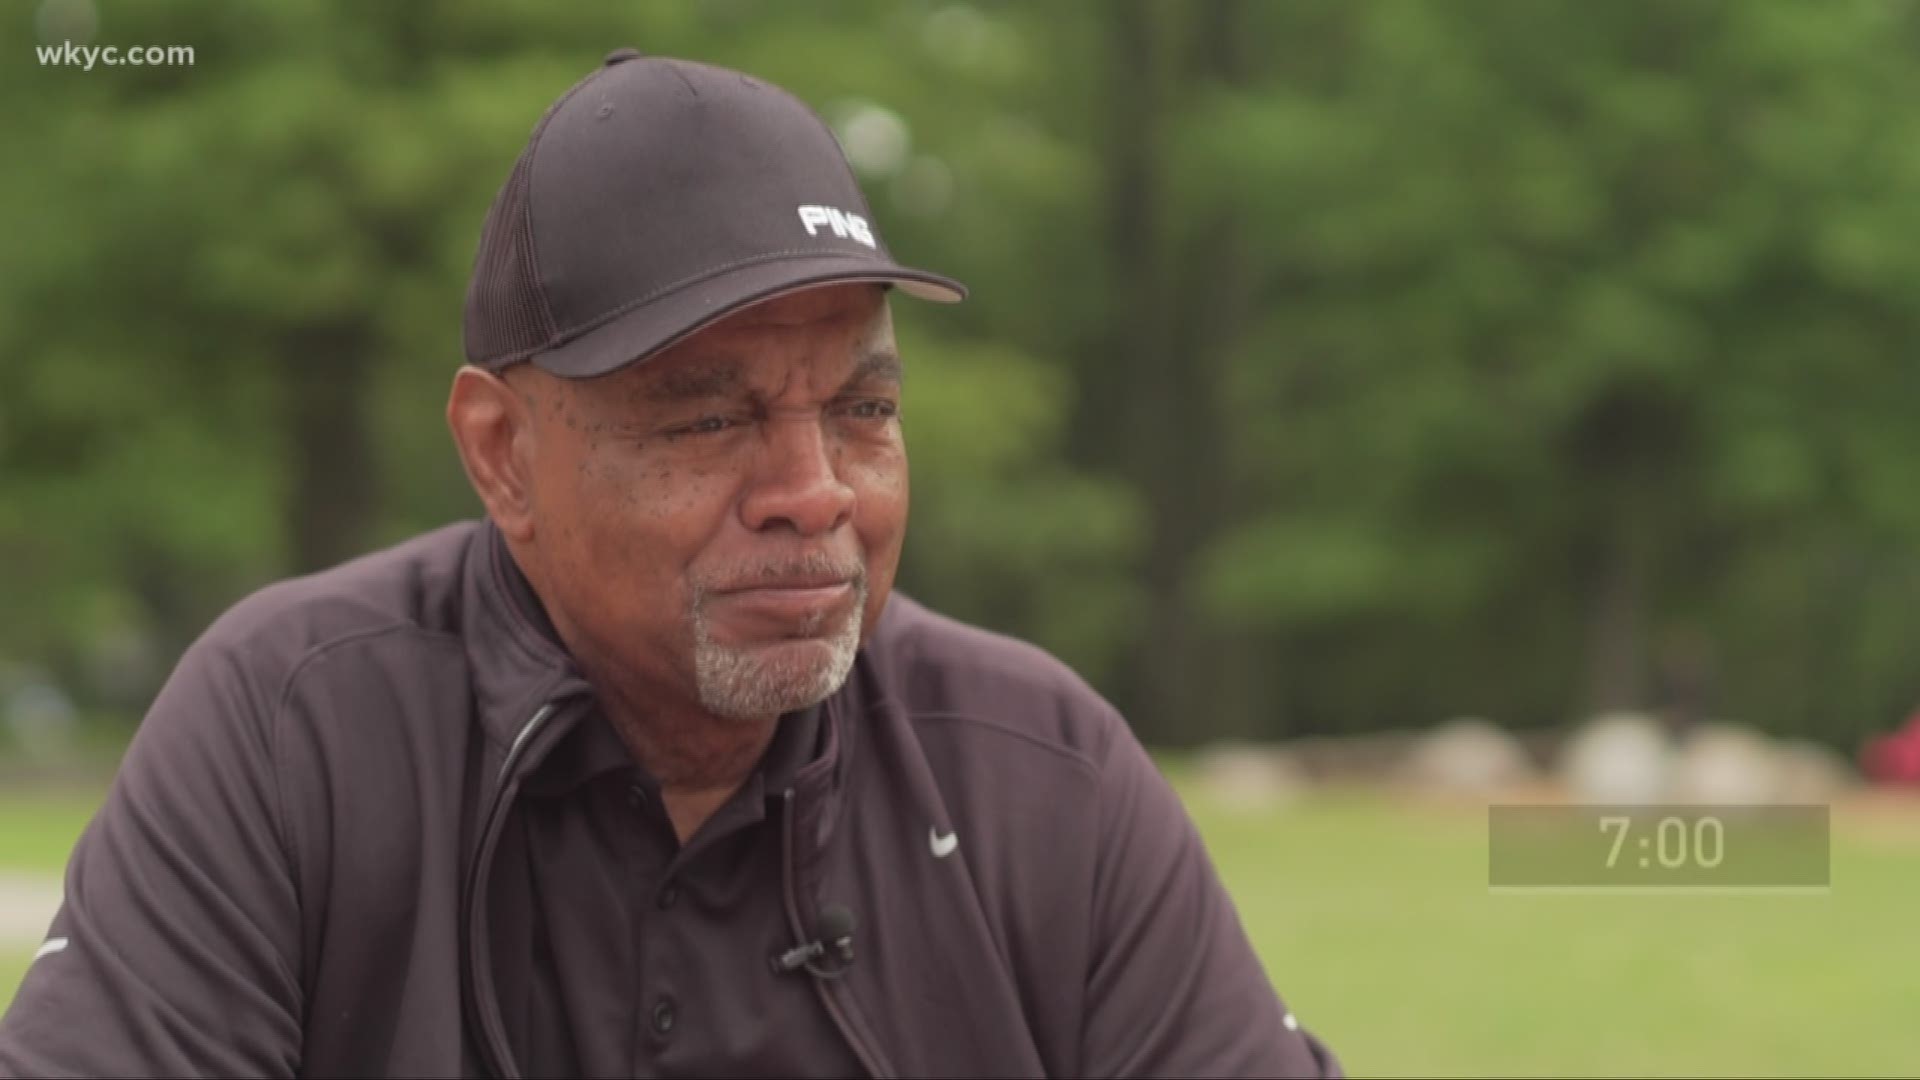 On this episode of 7 Minutes, WKYC's Russ Mitchell sits down with former Cleveland Brown, sports caster Reggie Rucker